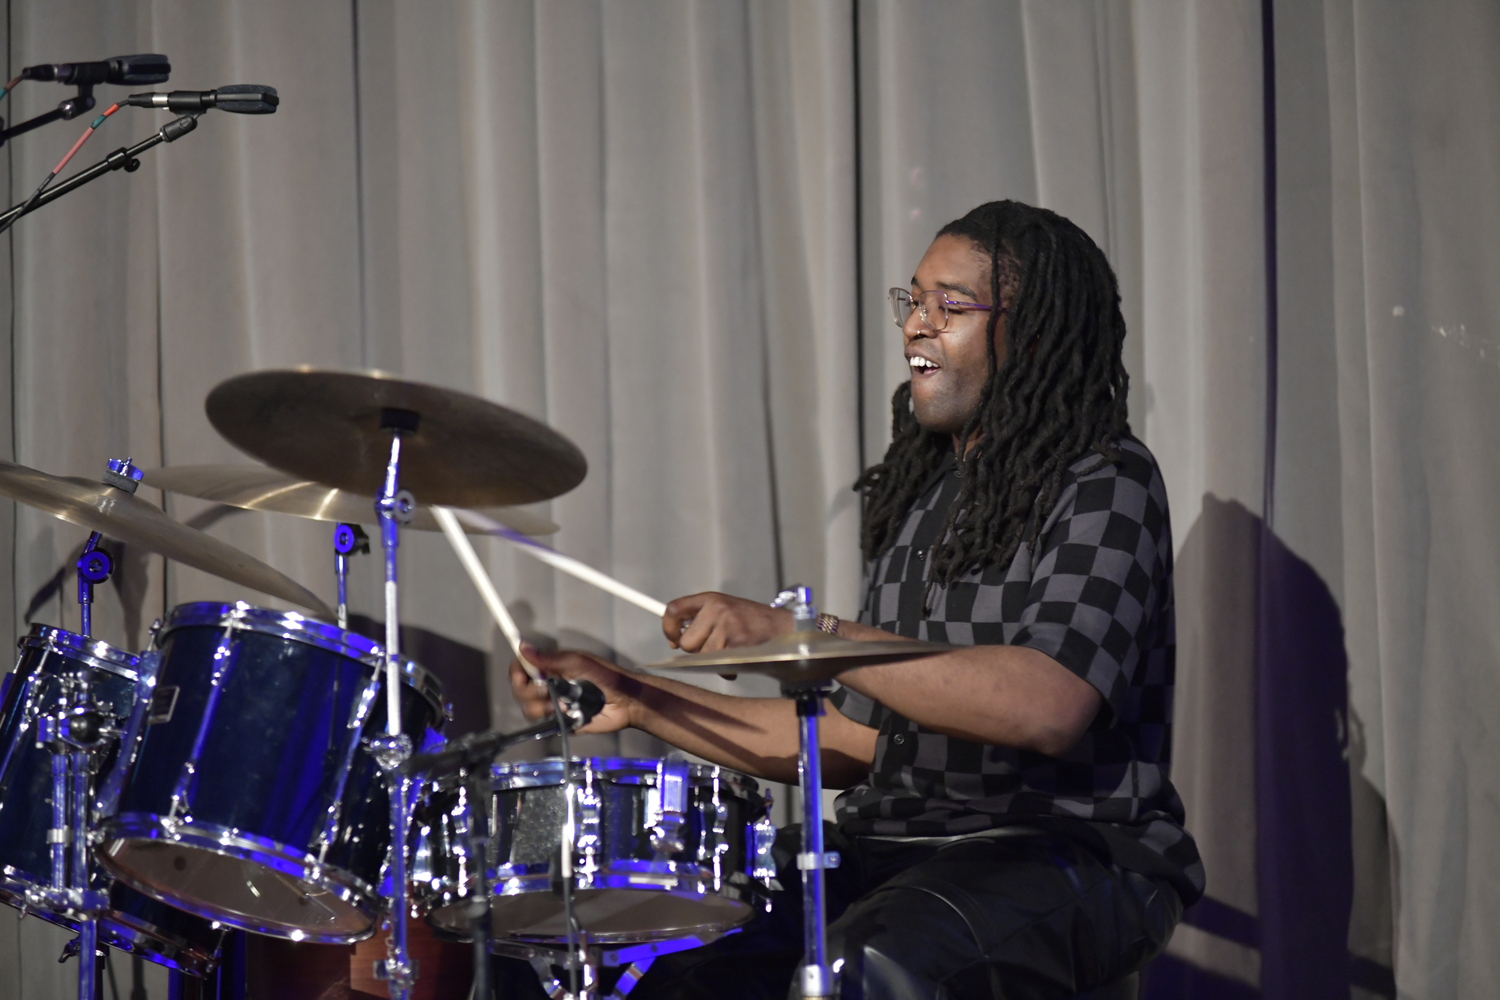 Michael Ode on drums with Stacy Dillard at the Southampton Arts Center on February 17.   DANA SHAW